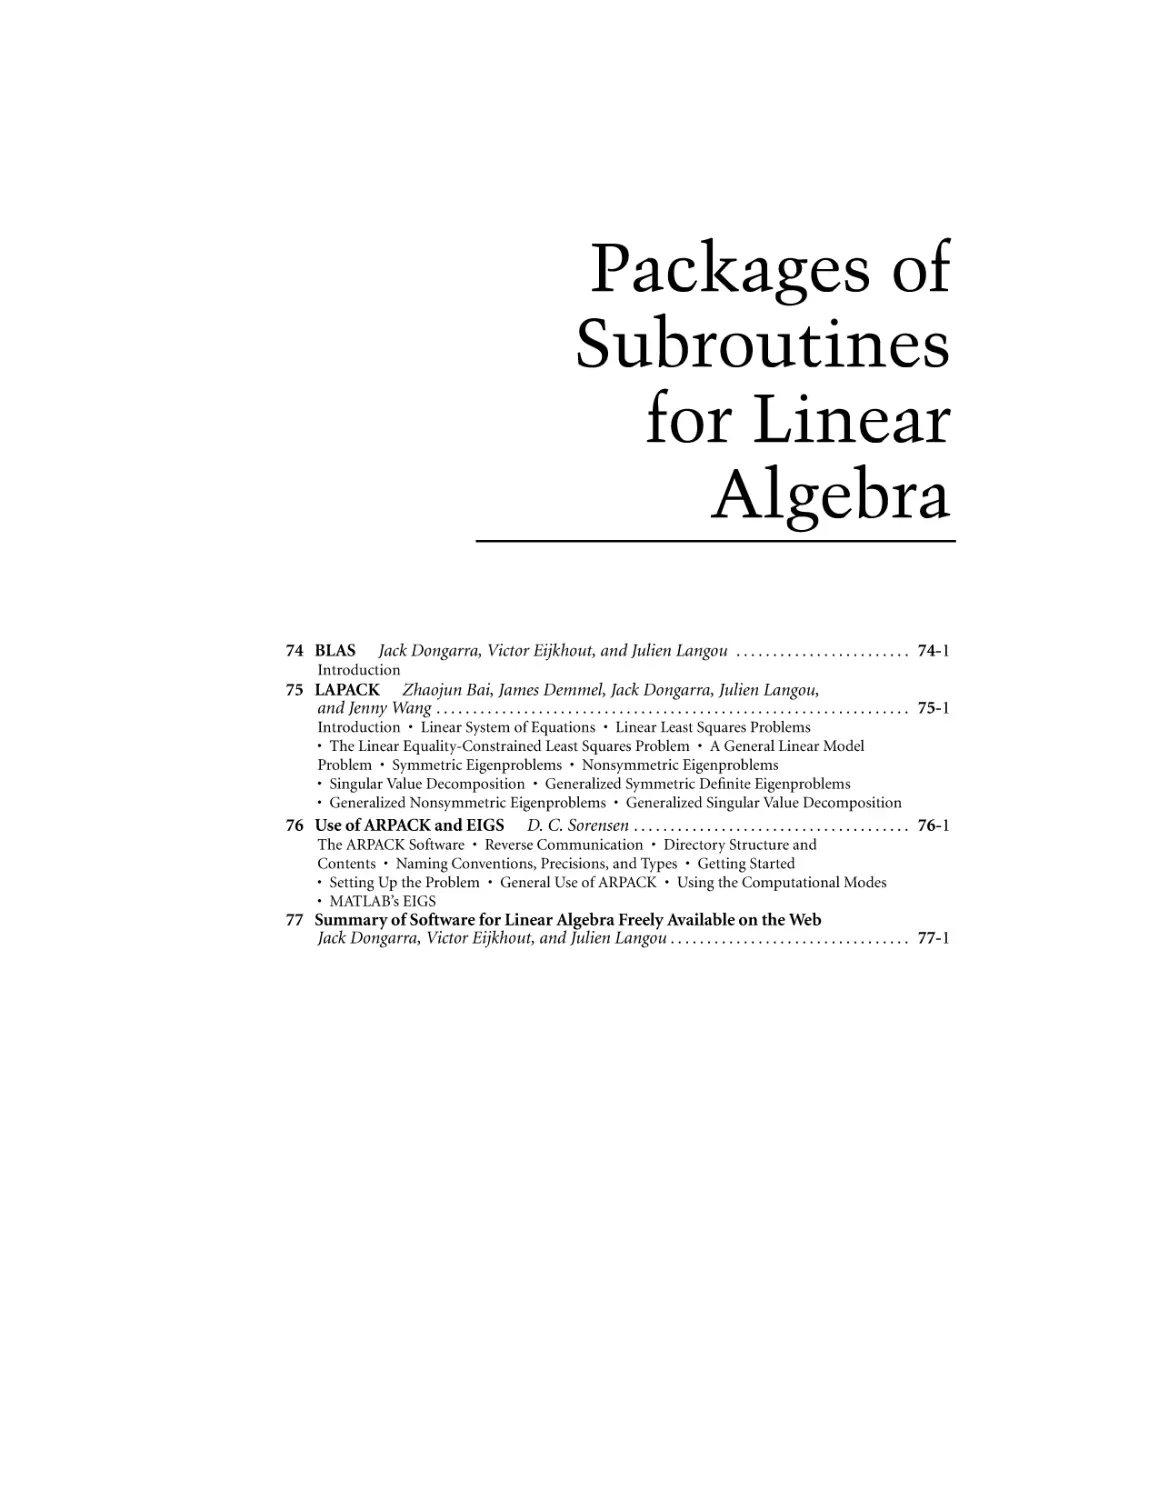 Packages of Subroutines for Linear Algebra